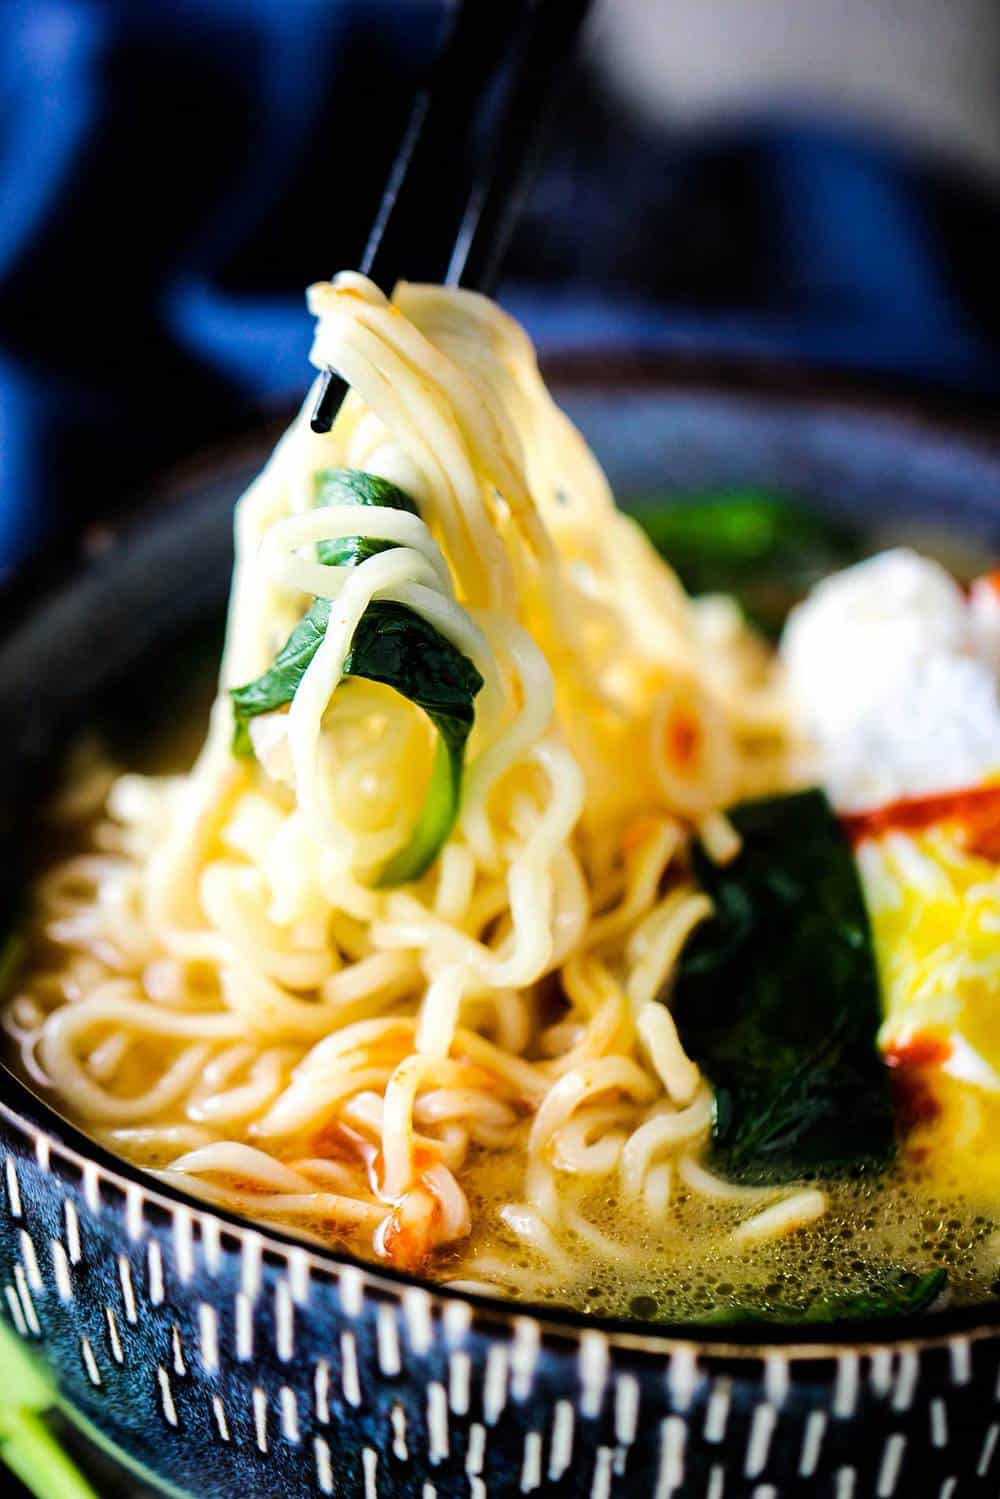 Ramen noodles being pulled out of a blue bowl of spinach ramen noodle soup with poached egg